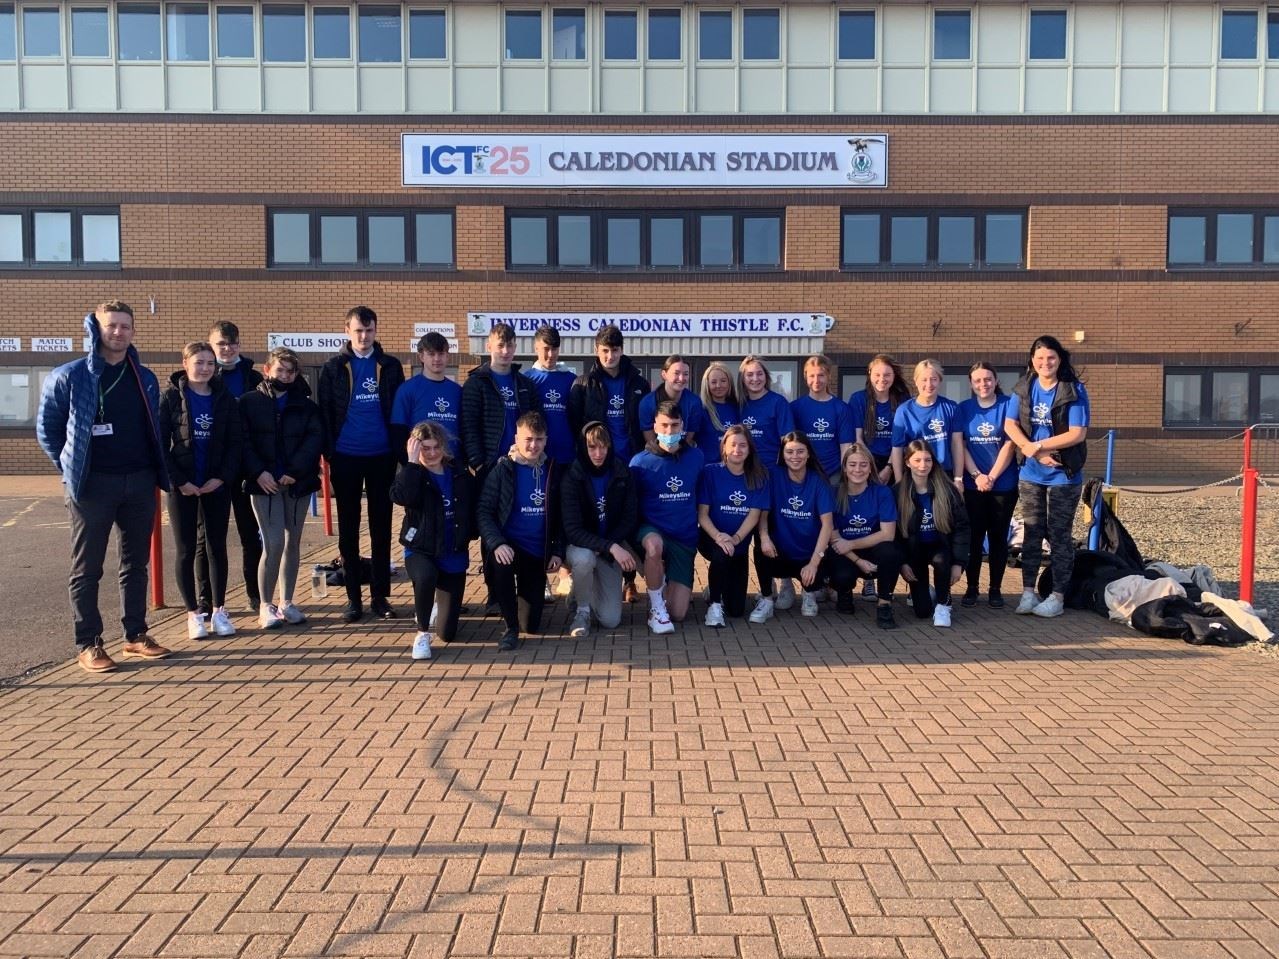 Pupils from Inverness Royal Academy recently carried out a sponsored sit-down at Inverness Caledonian Thistle’s grounds to support local charity Mikeysline.